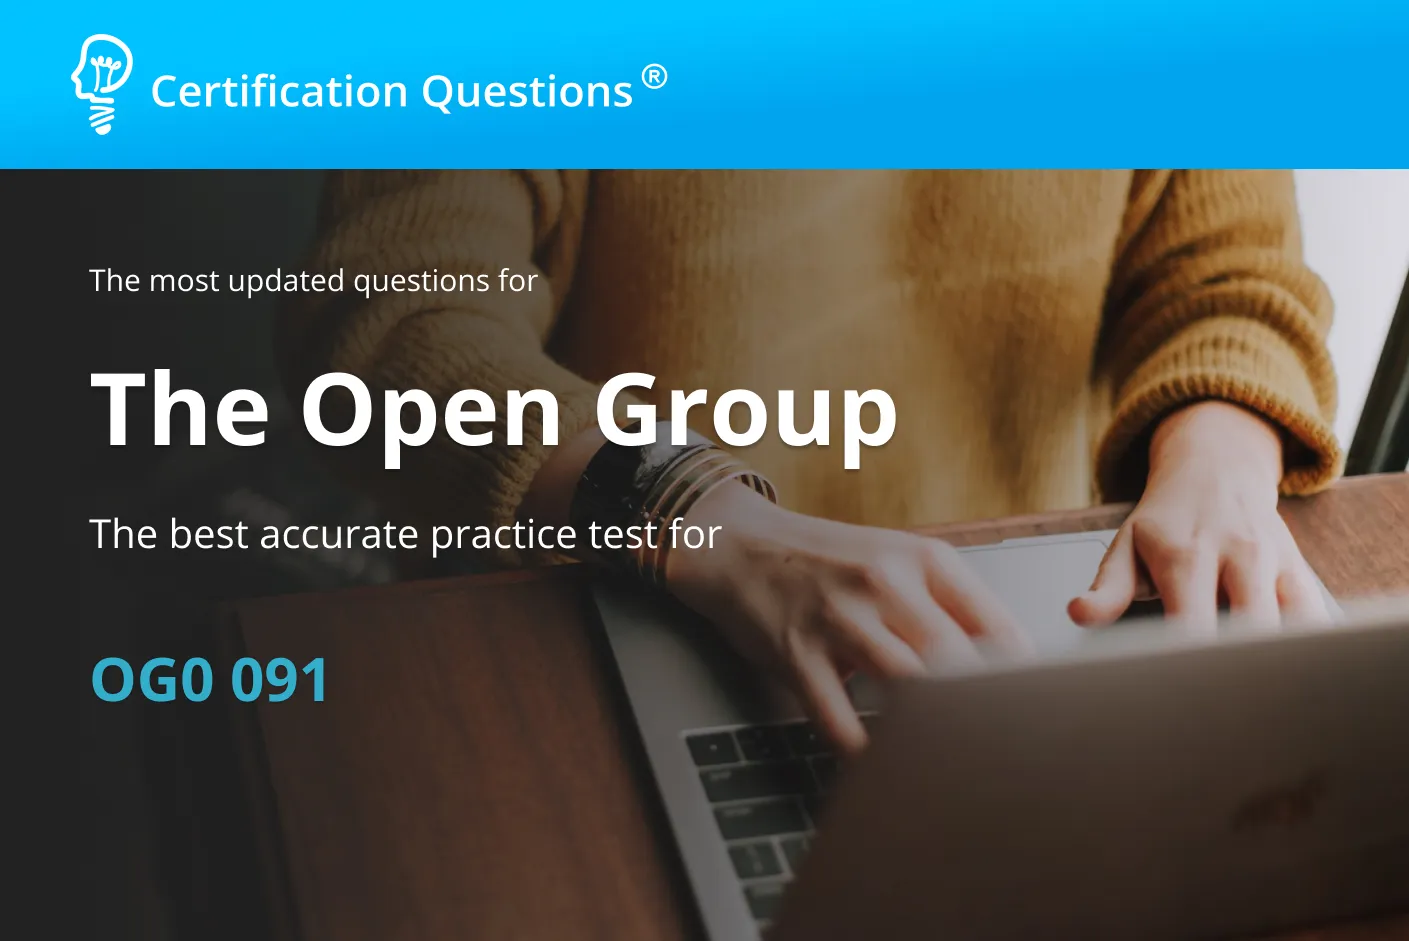 Learn about the OG0 091 exam questions in detail, from this comprehensive study guide.